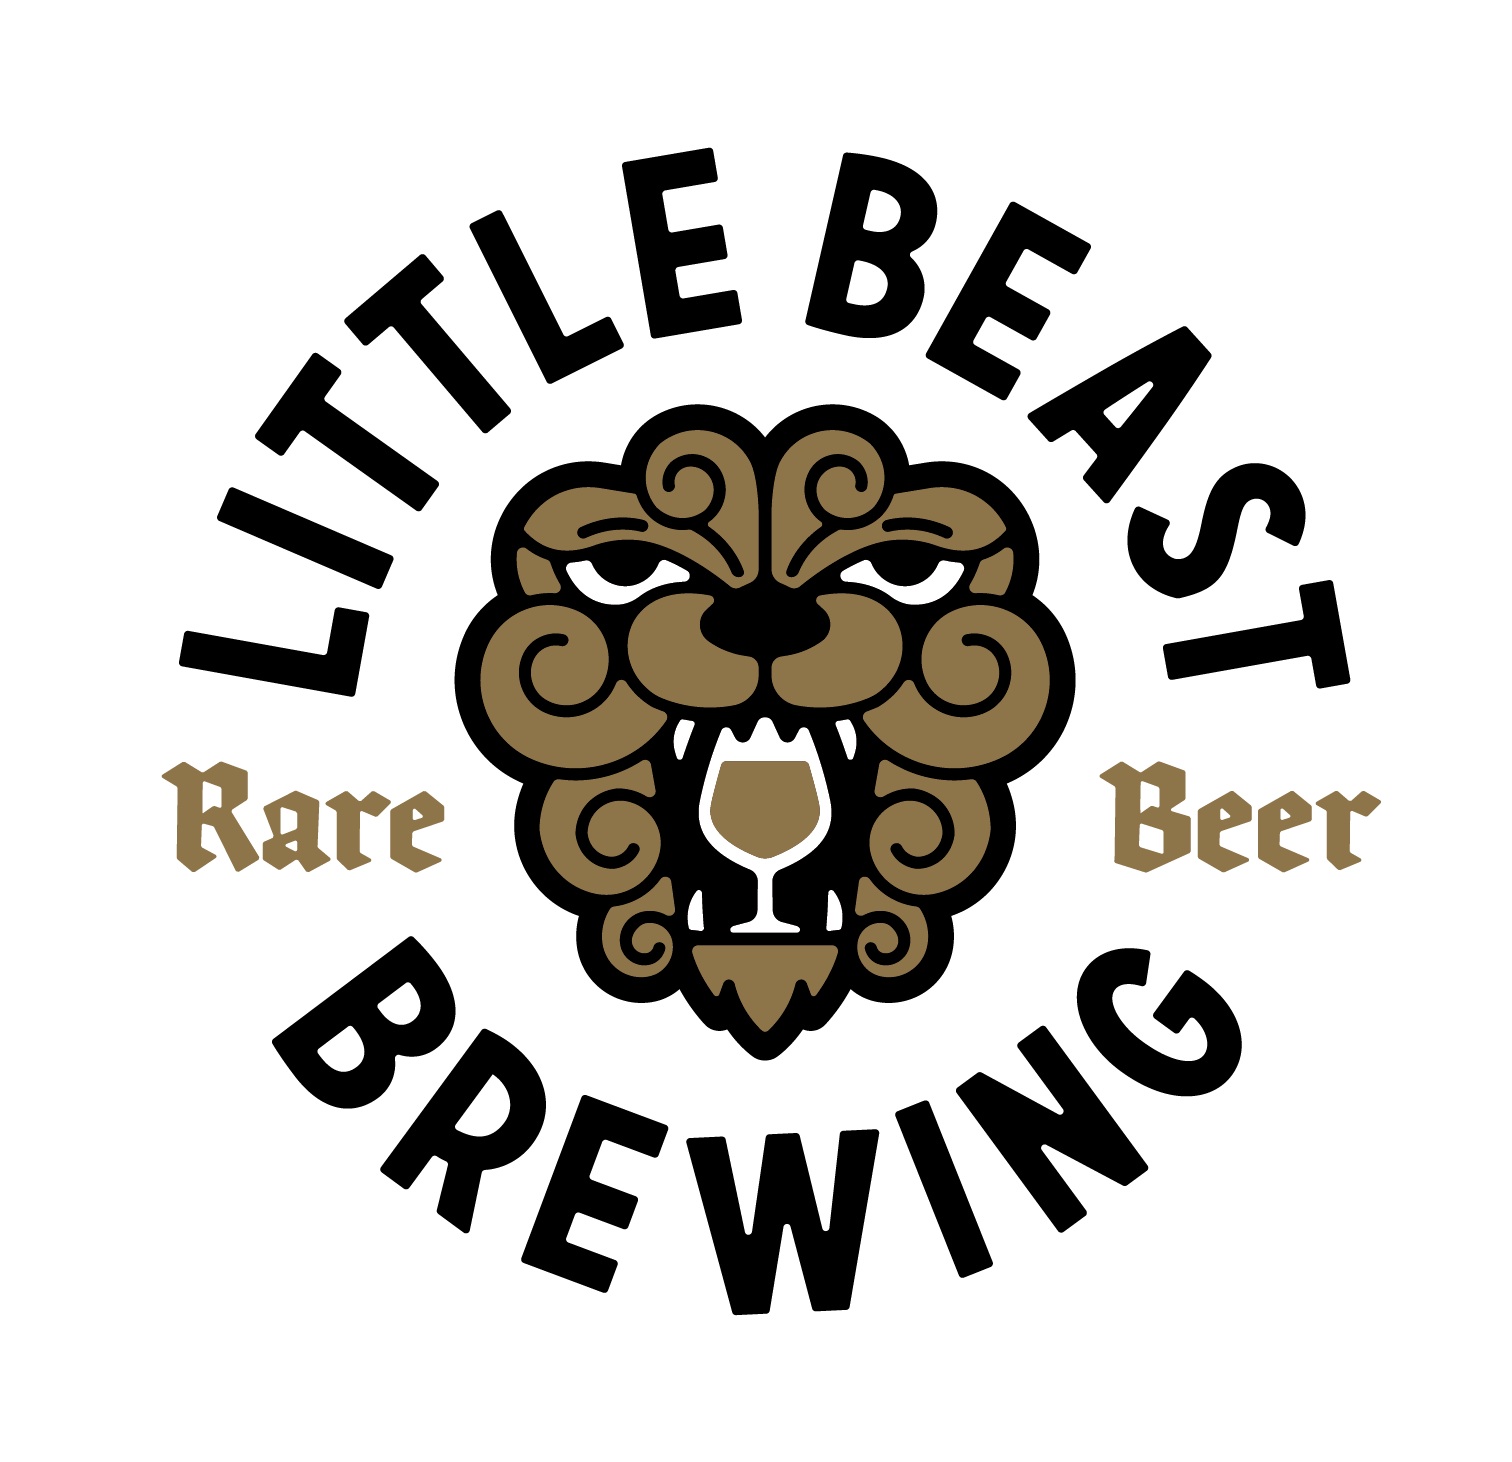 Tuesday, February 13th @ 6pm, Little Beast Washington Launch Event